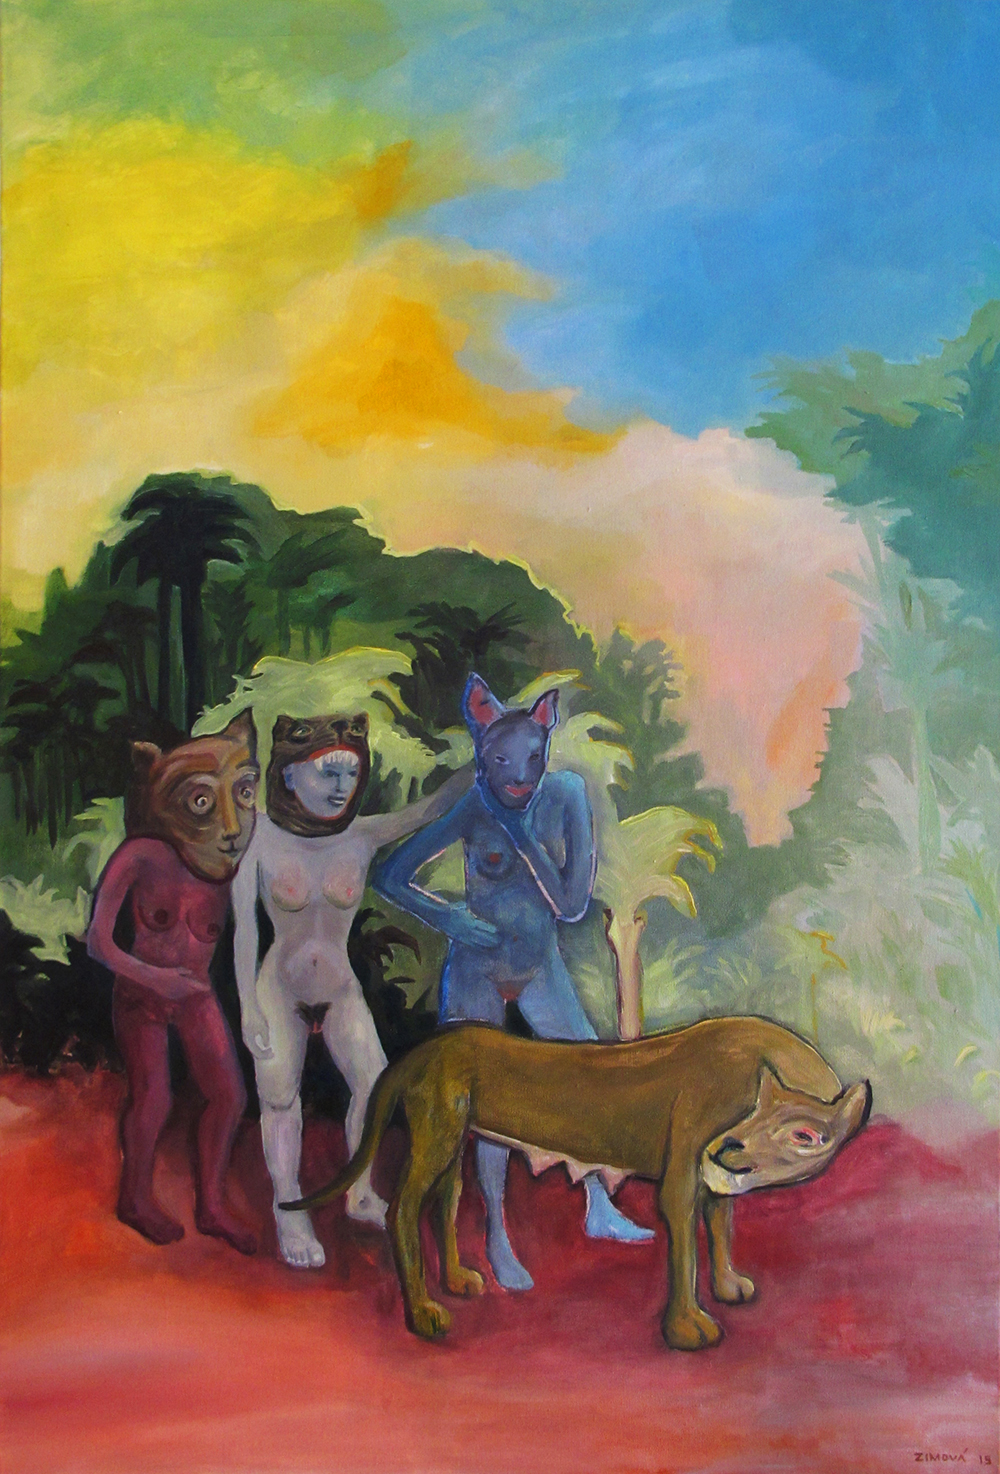 The best costume, 80 x 100 cm, oil on canvas, 2015